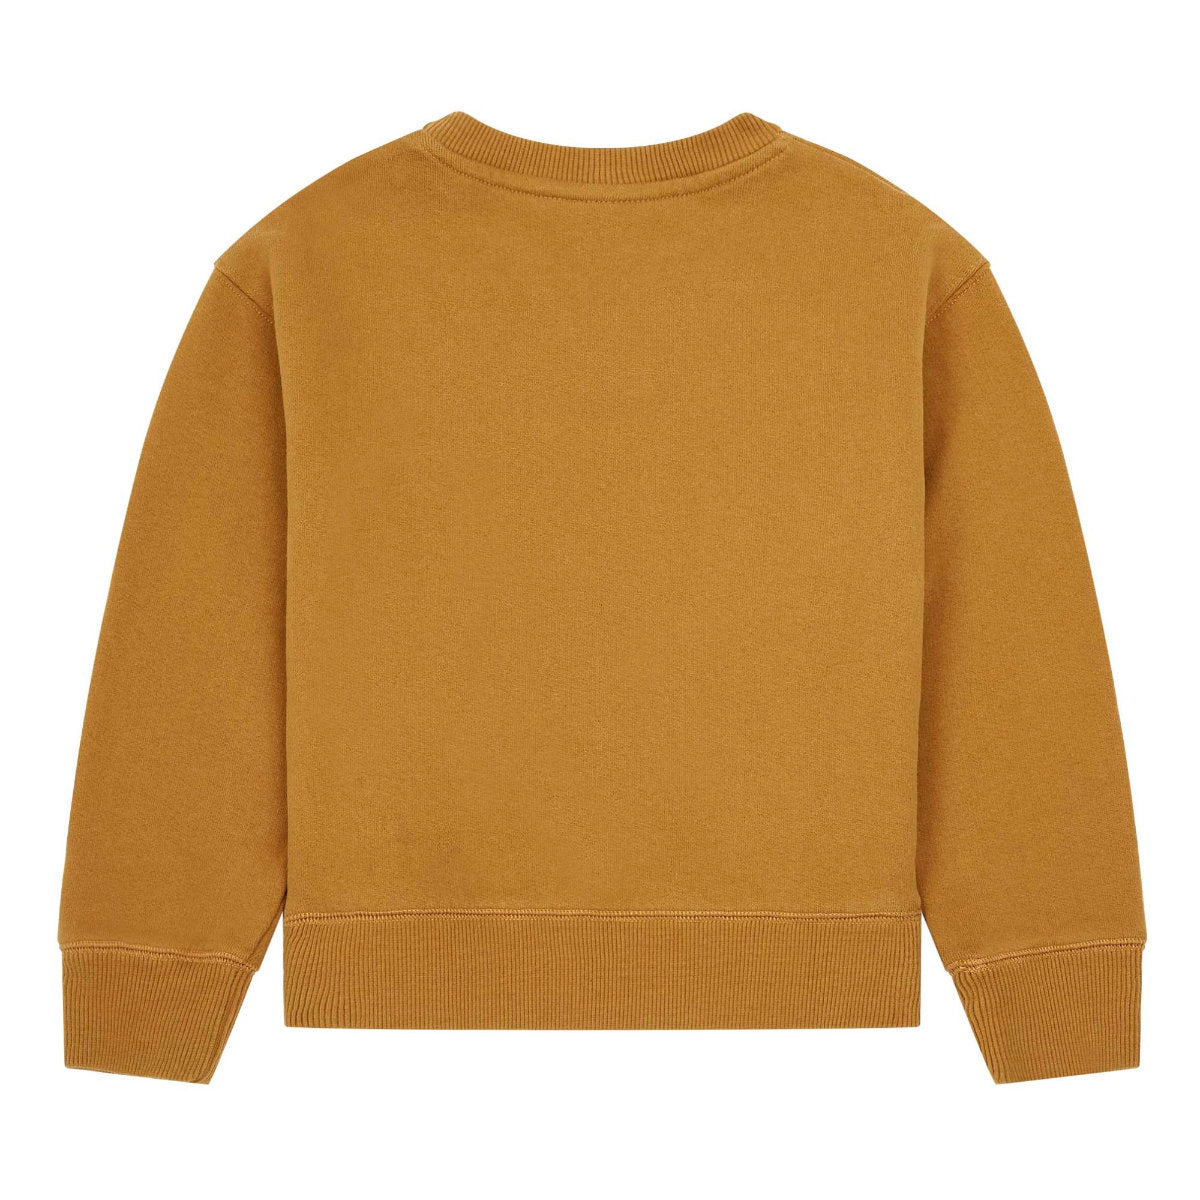 Hundred Pieces Outsider Sweatshirt brown